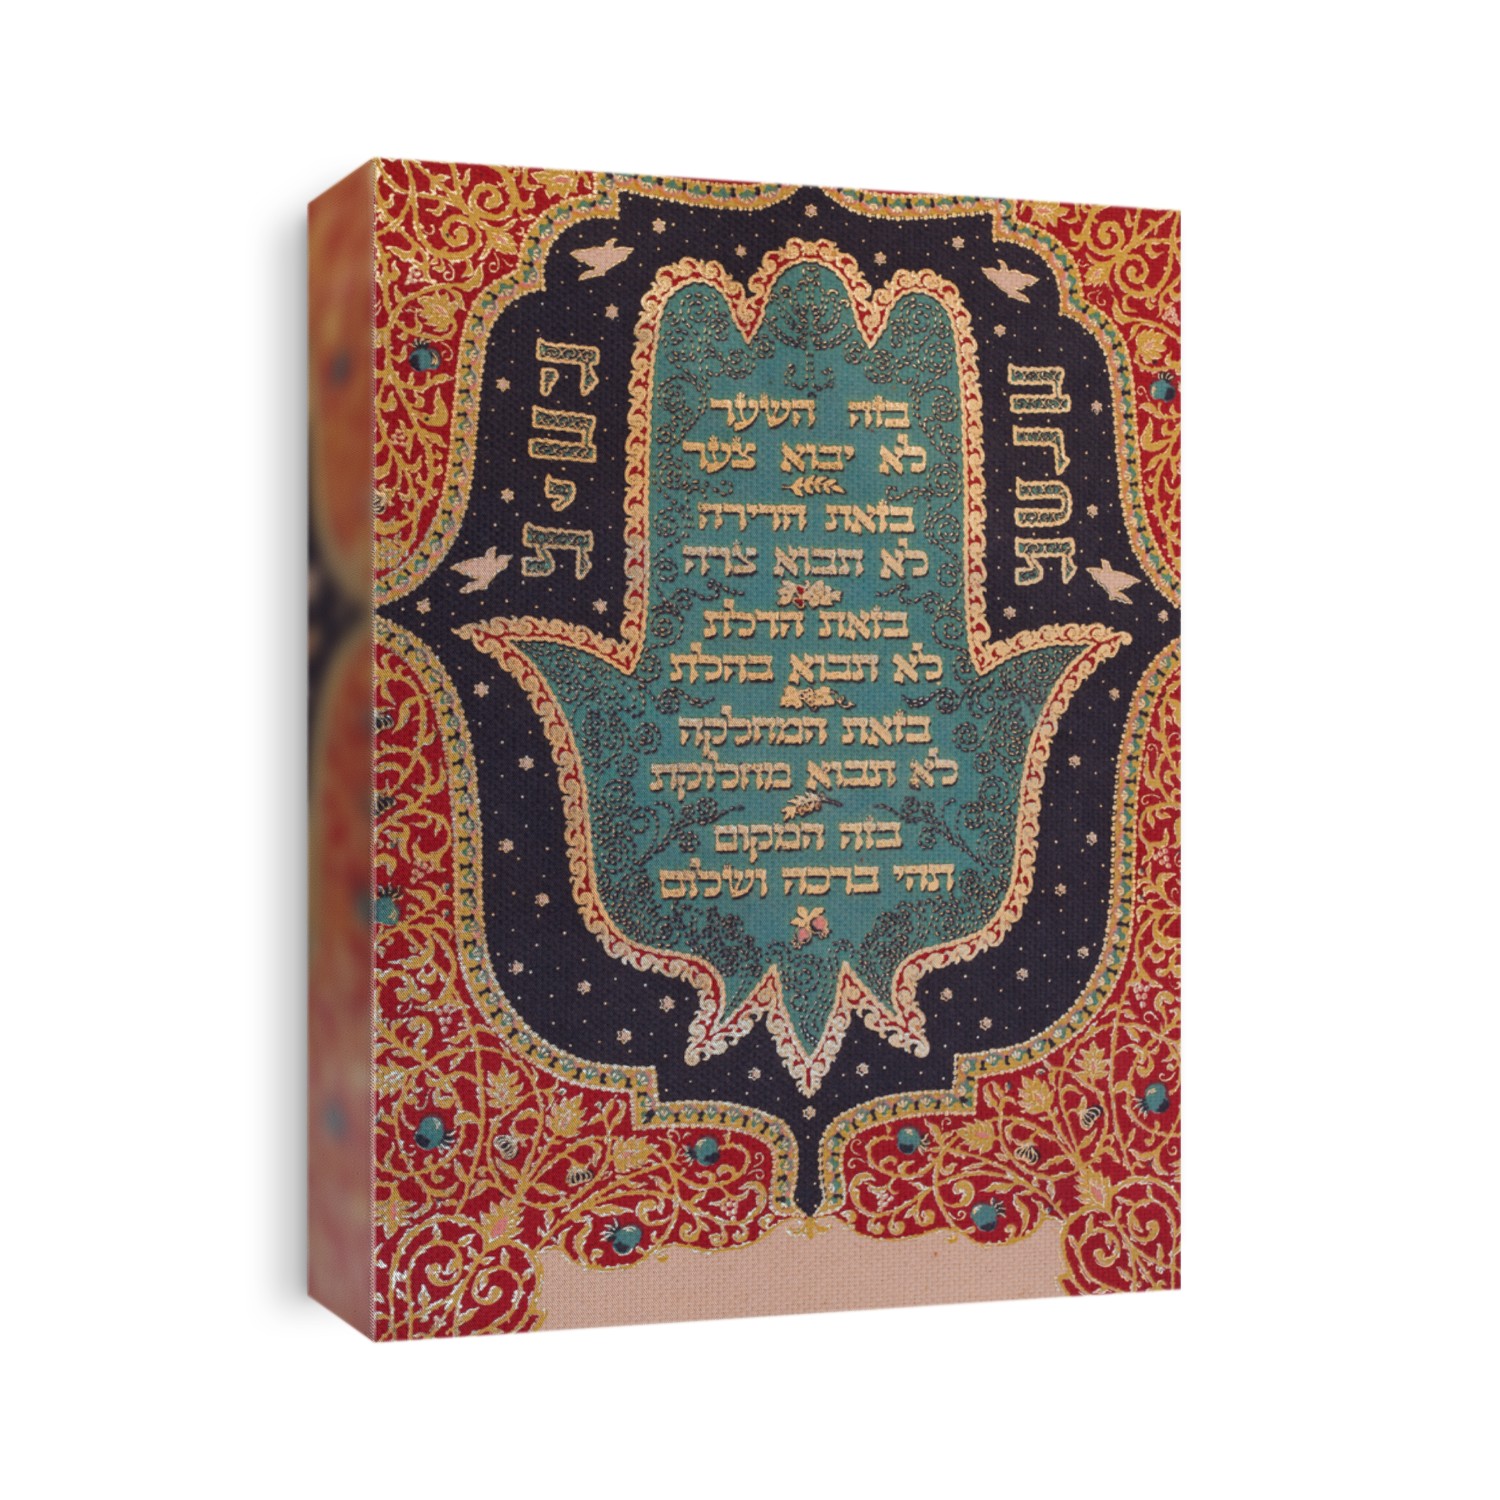 Blessing for home (Judaism)